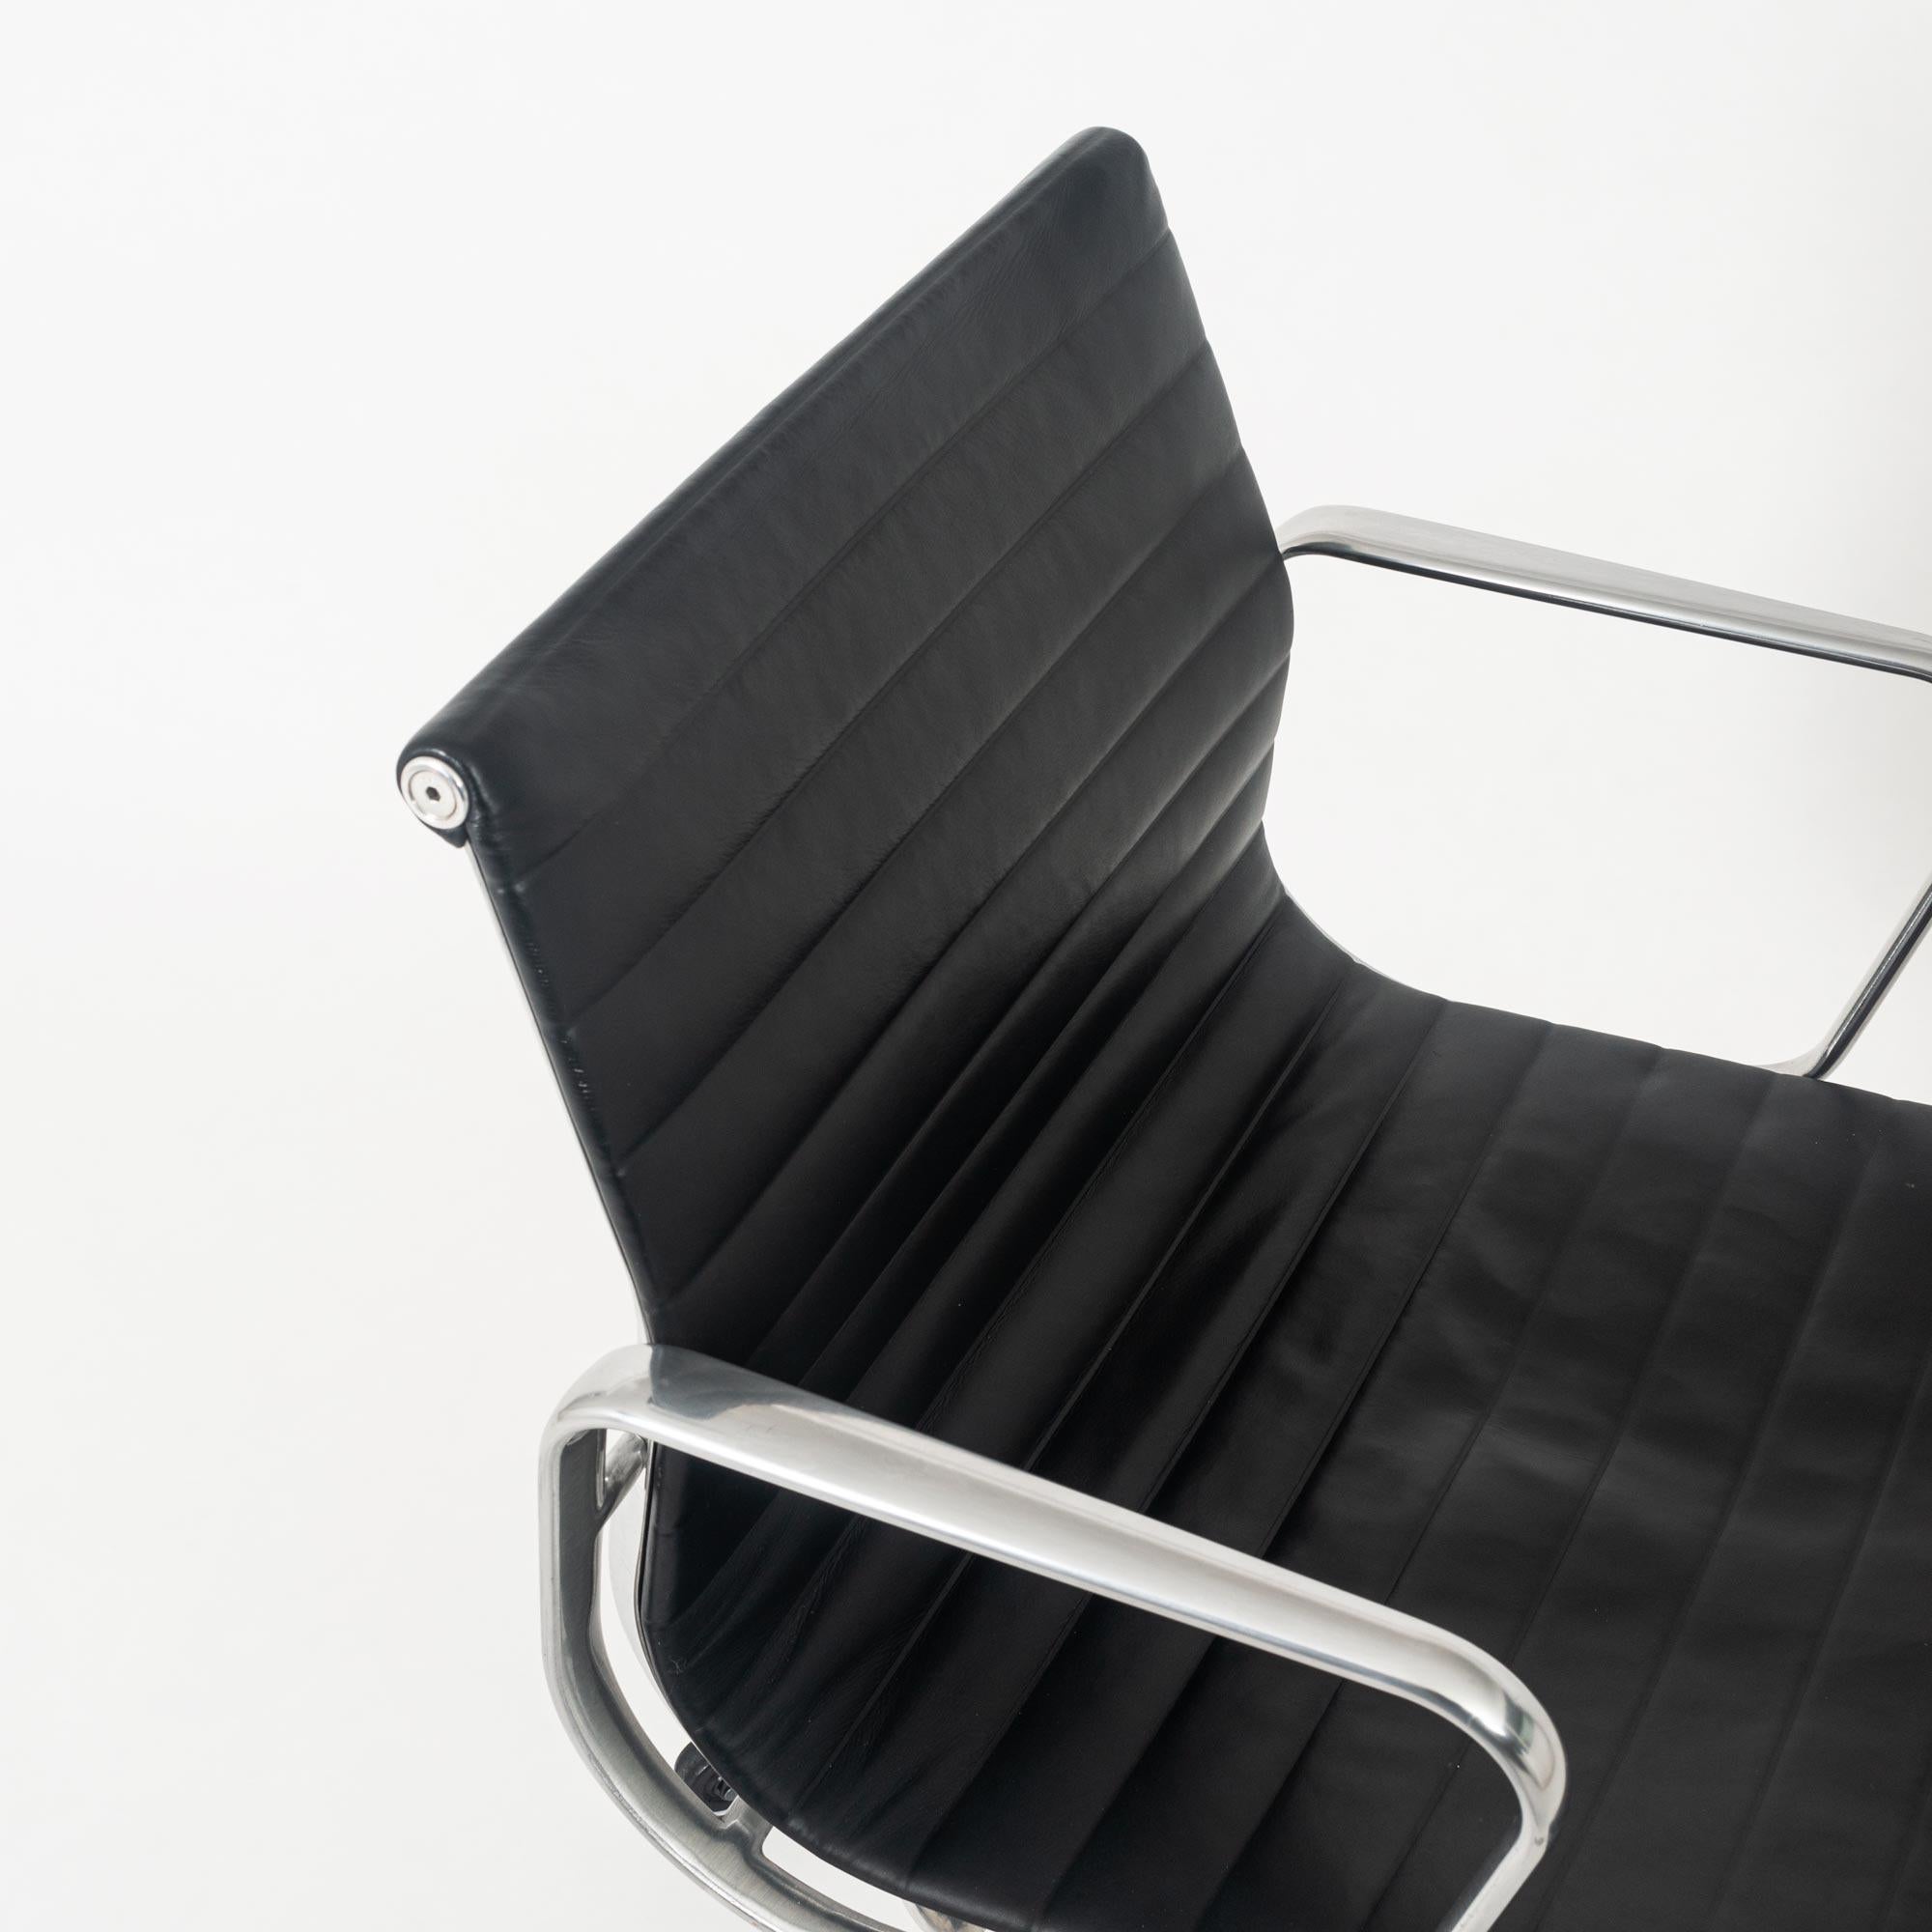 North American Eames Aluminum Group Leather Desk Chair